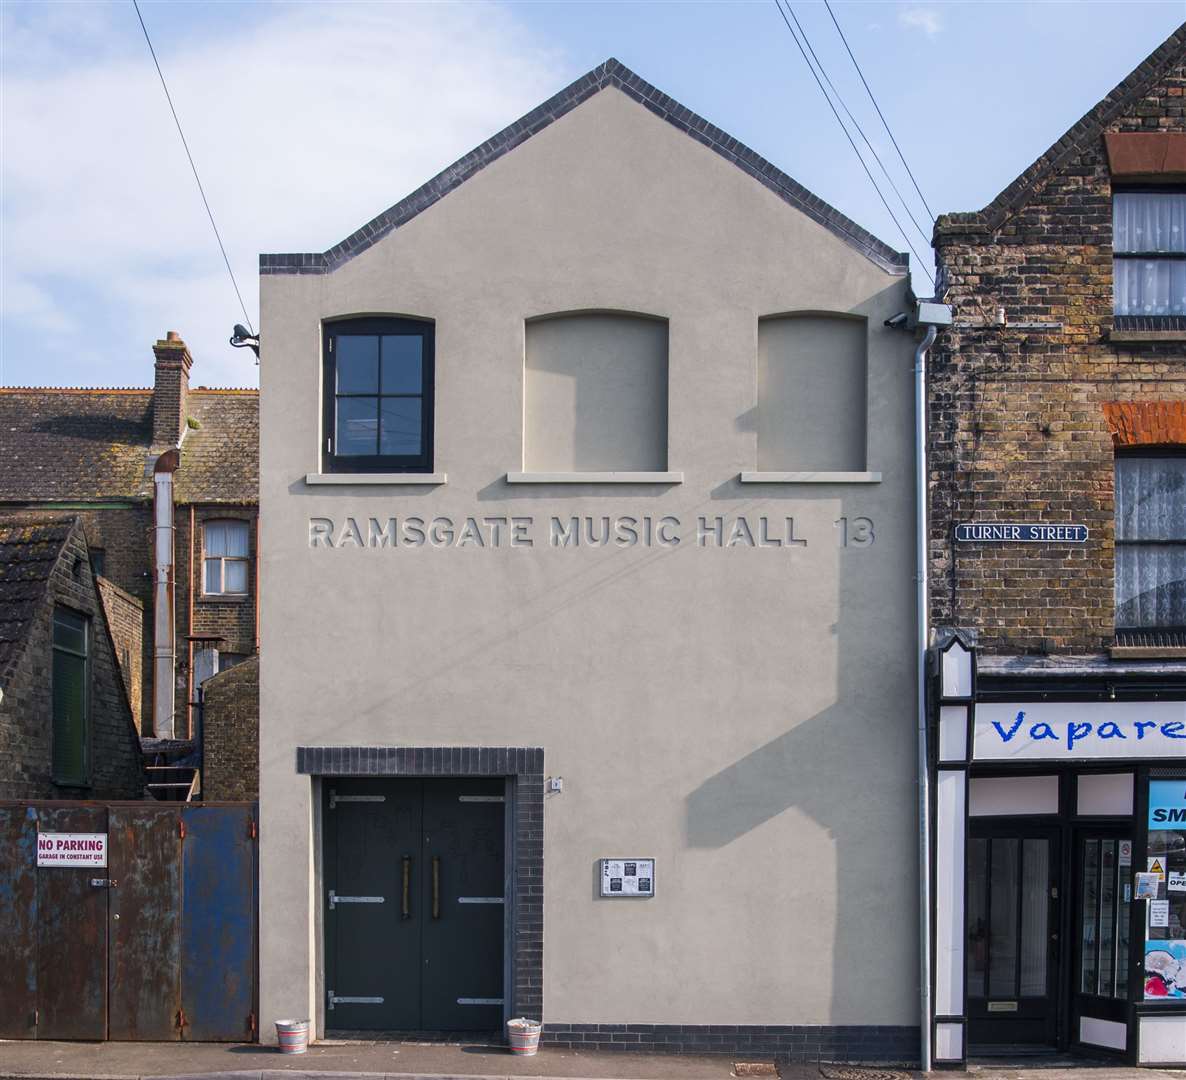 The Ramsgate Music Hall was recently awarded money from the government's Cultural Recovery Fund